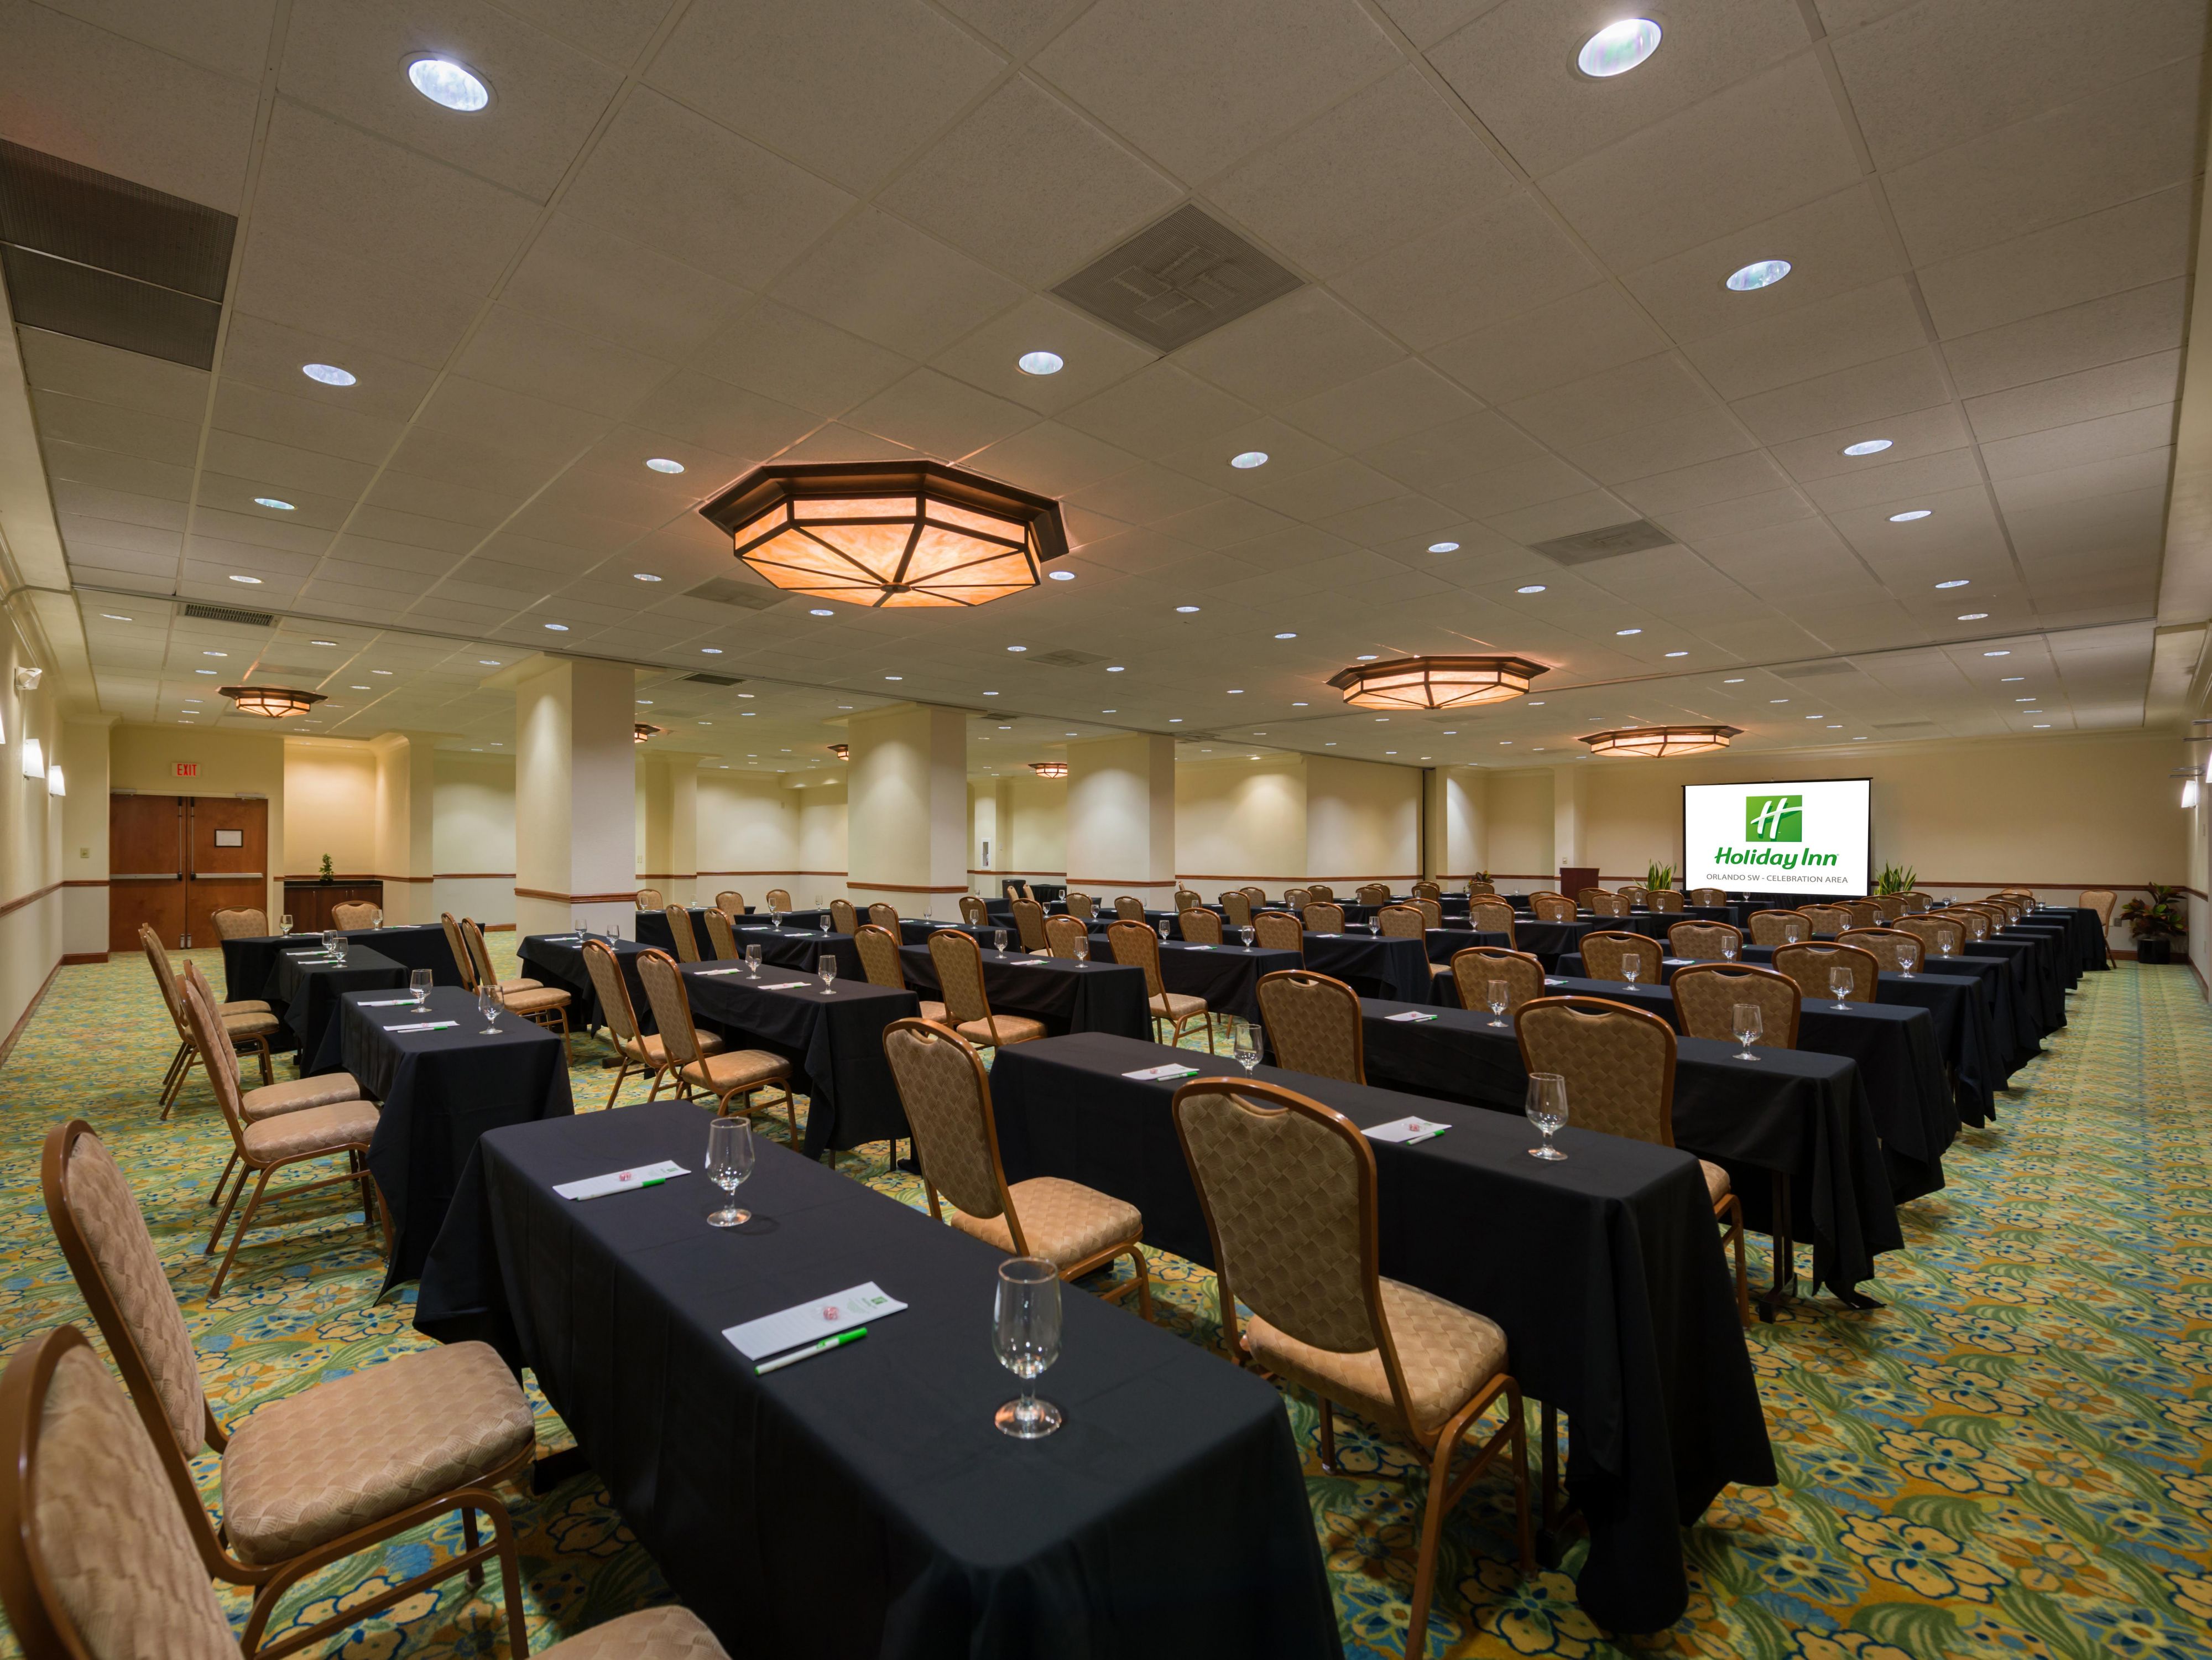 We've got everything you need to make your meeting or event run smoothly. With over 3,700 square feet of hybrid meeting space in Orlando with four rooms, a stylish ballroom, flexible layouts, and audio-visual equipment for events, weddings, and gatherings. Make genuine connections and celebrate in an energetic atmosphere.